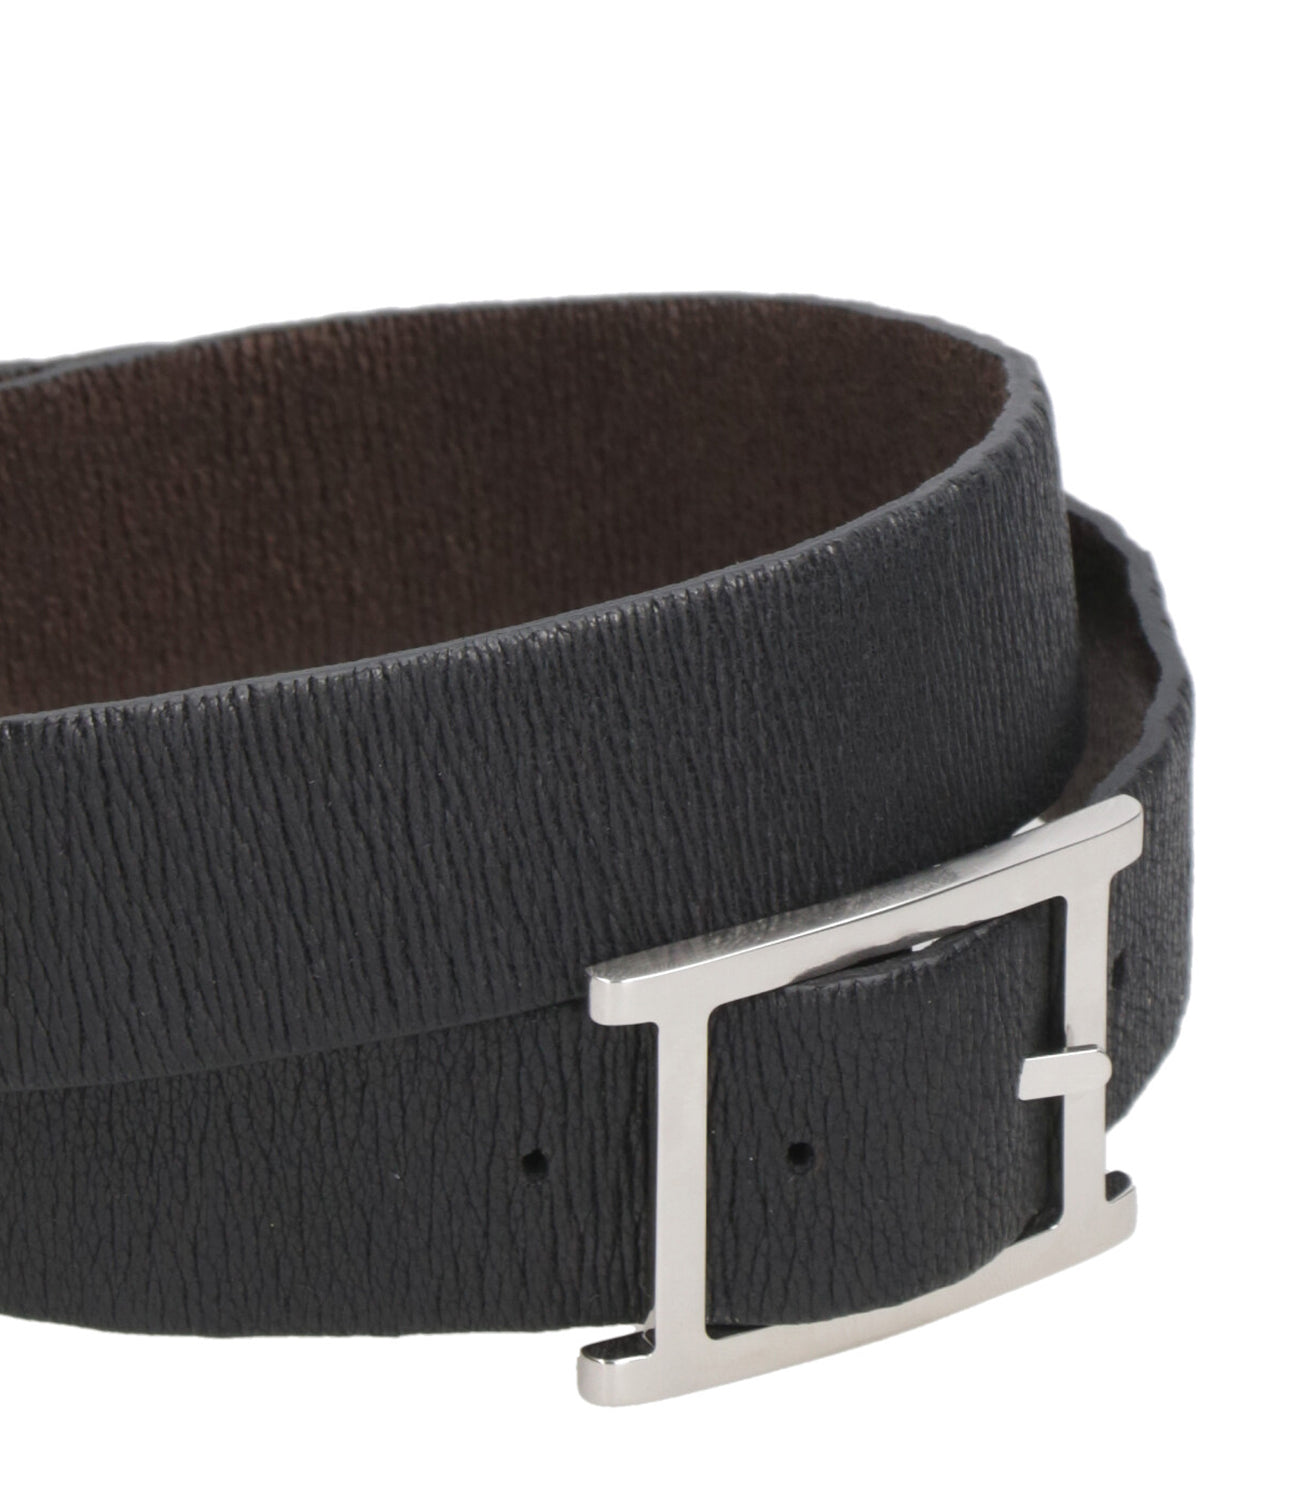 Orciani | Black and Brown Belt